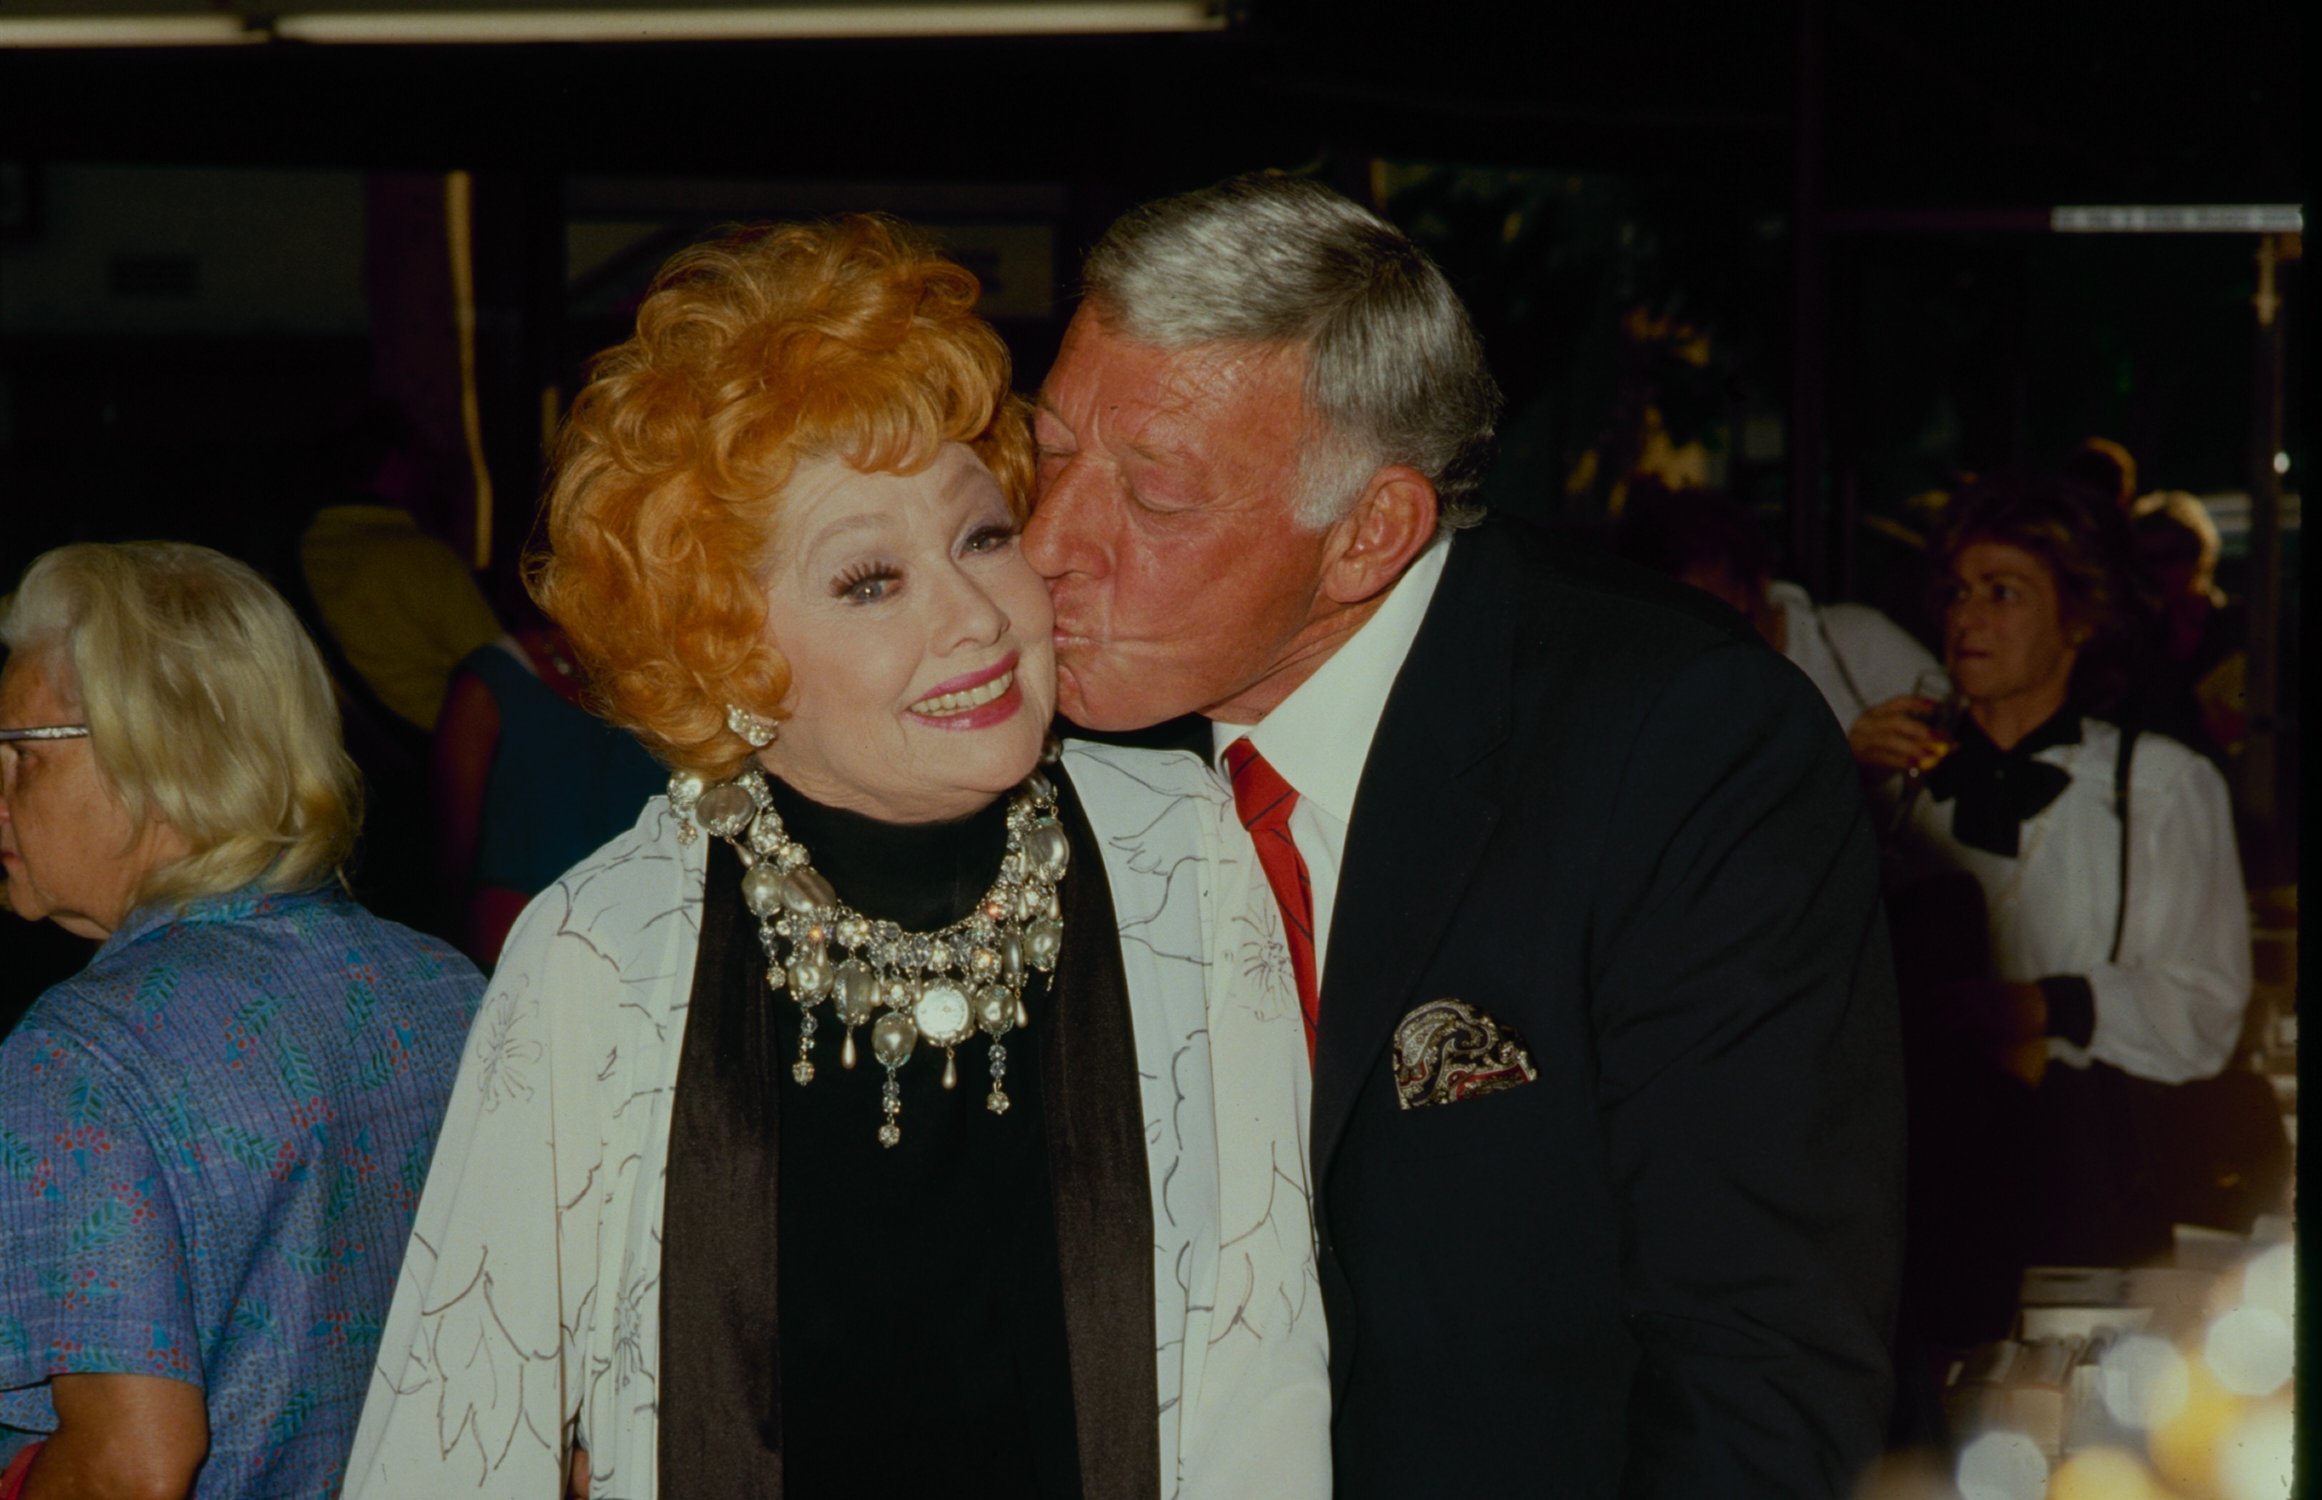 Lucille Ball and Gary Morton | The LIFE Picture Collection via Getty Images